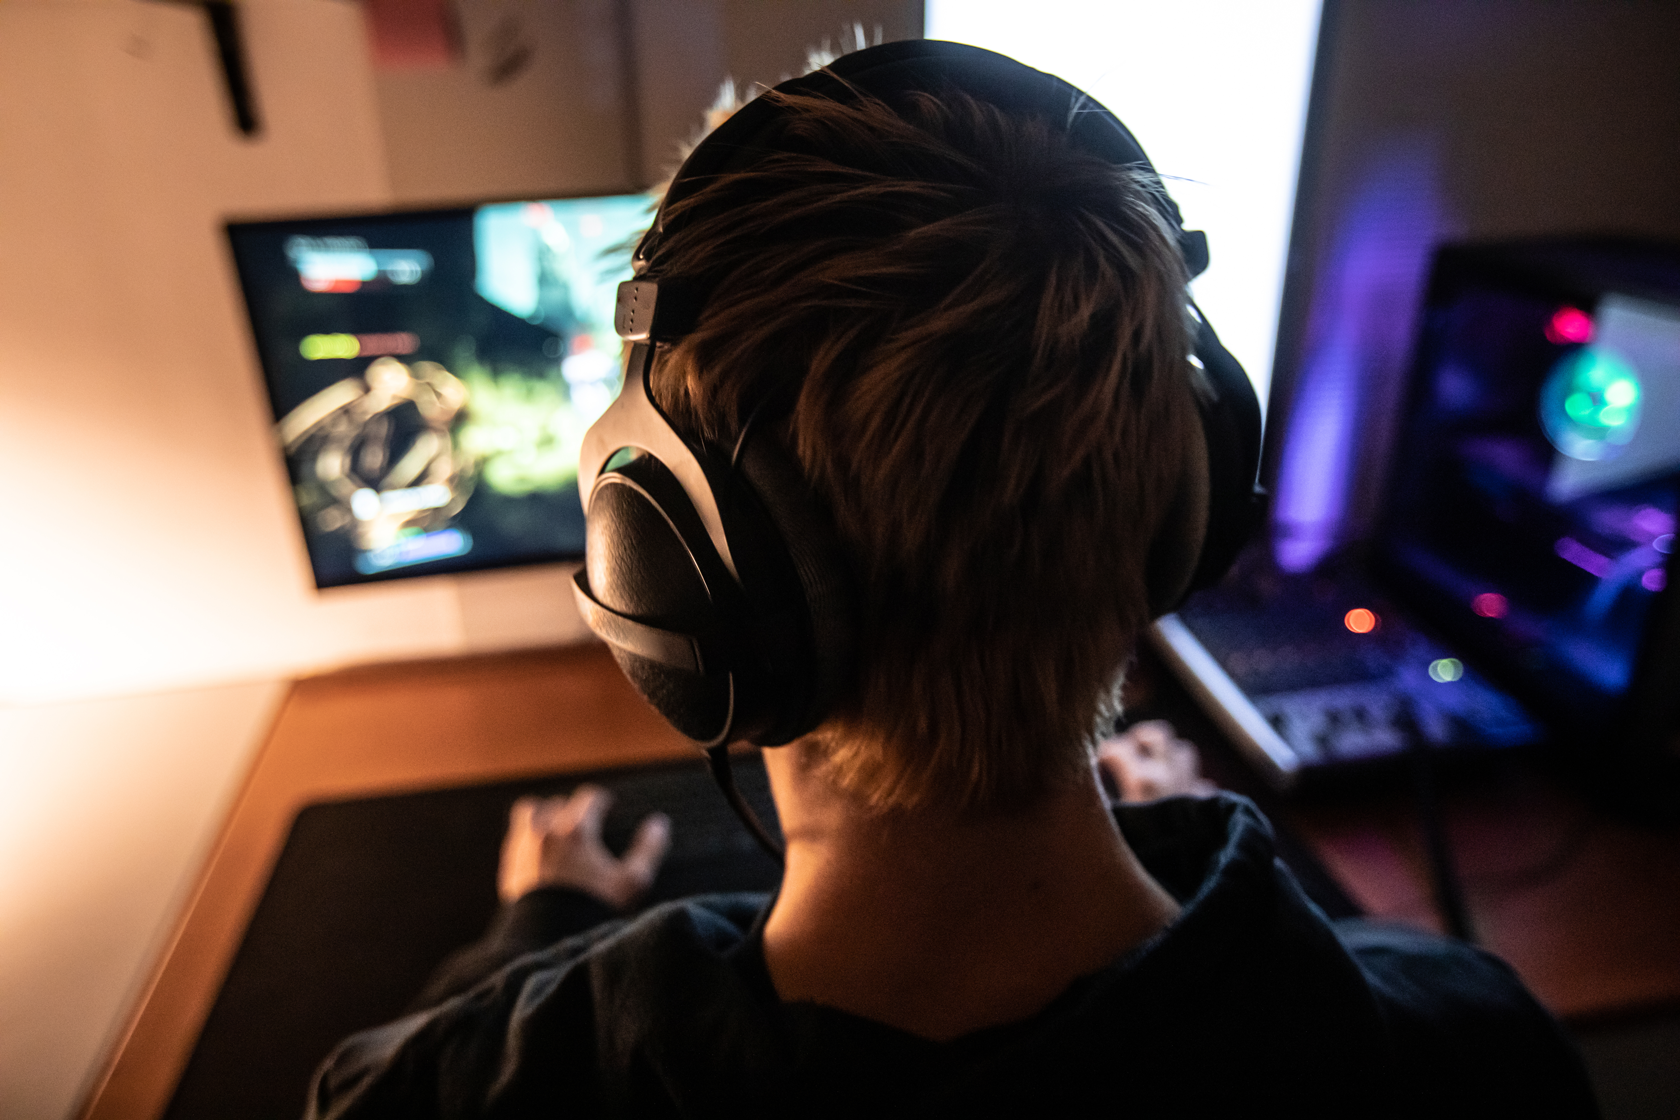 A young man is playing video games while wearing a headset.